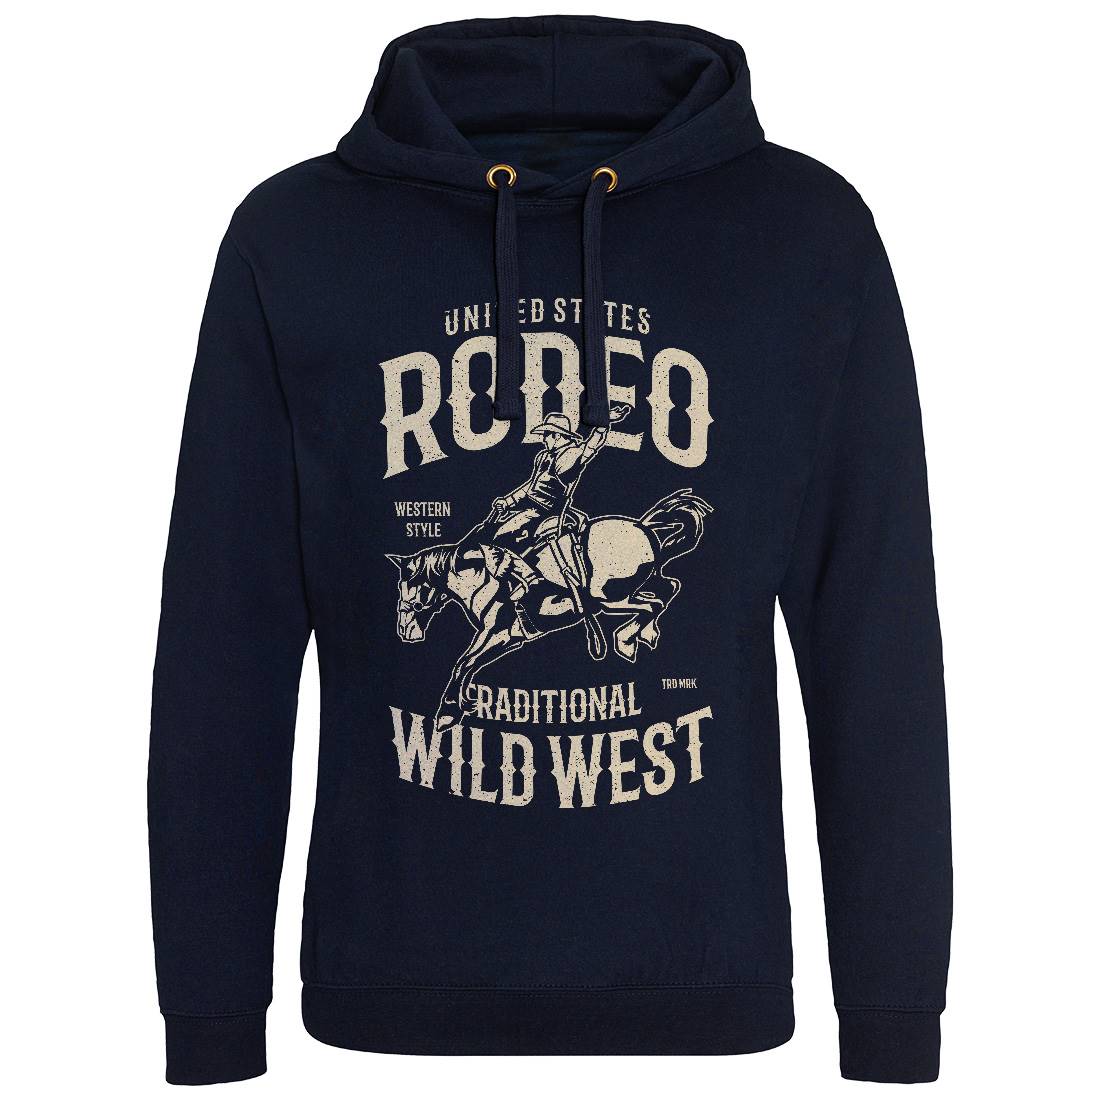 Rodeo Mens Hoodie Without Pocket American A748